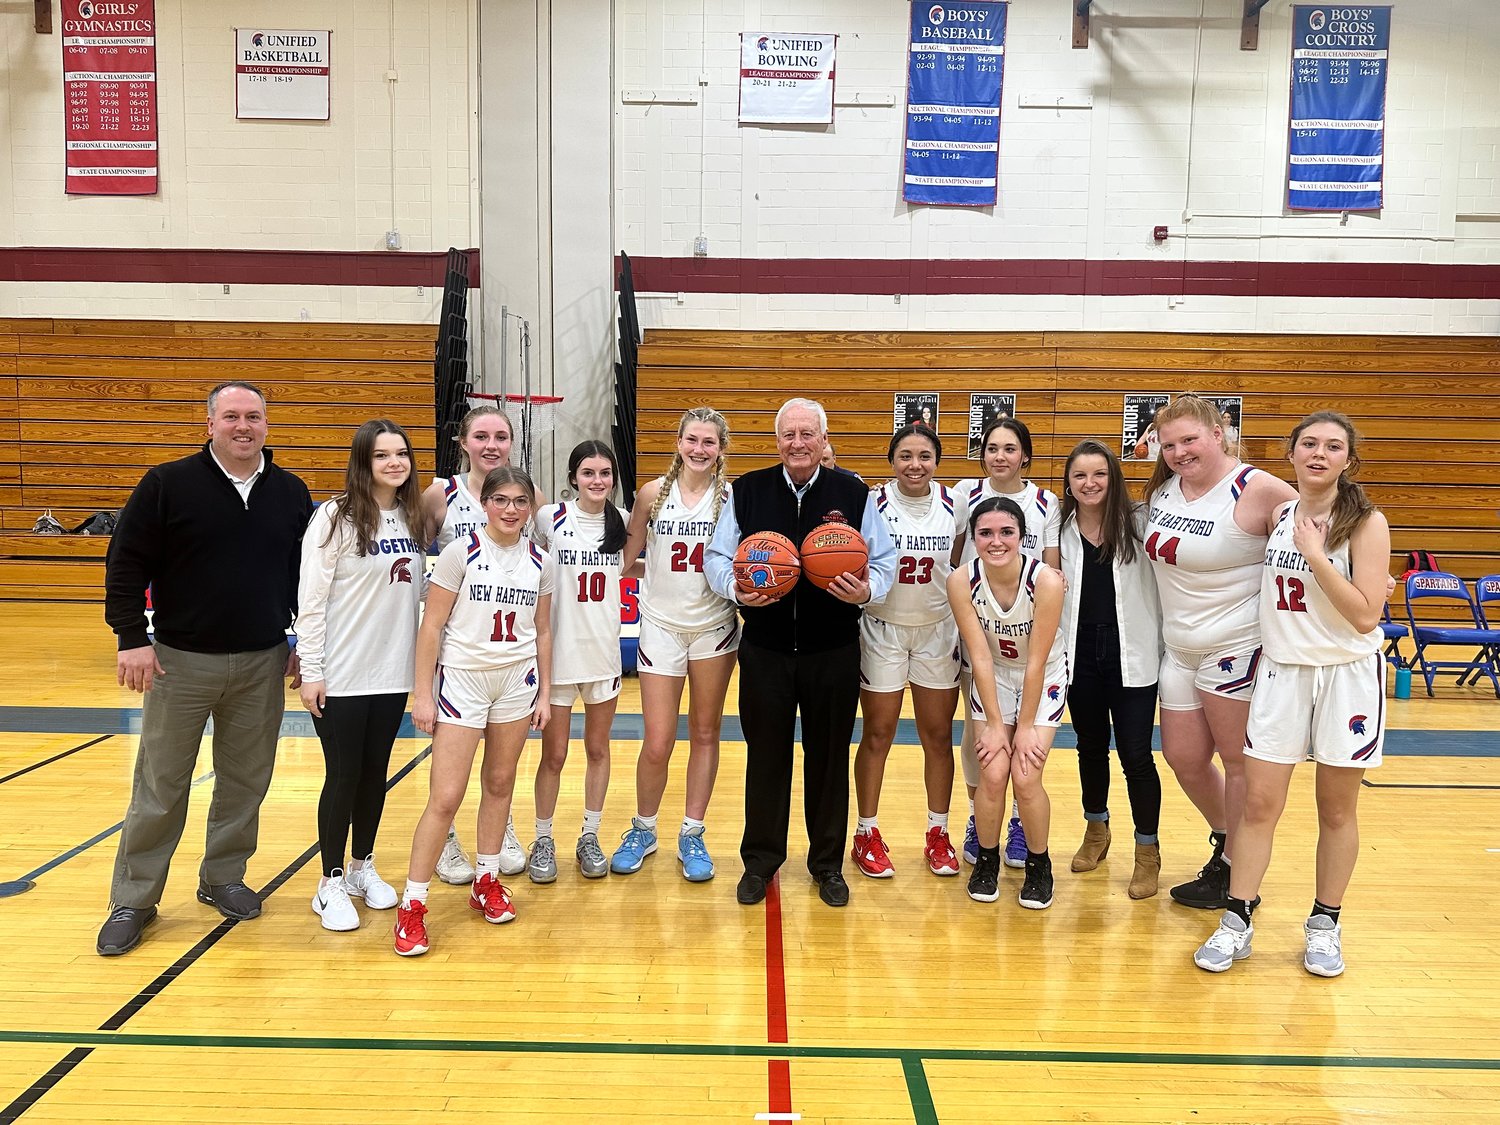 Longtime New Hartford girls basketball coach Mike Callan won his 300th game on Friday with the Spartans. He’s planning to retire at the end of the season.